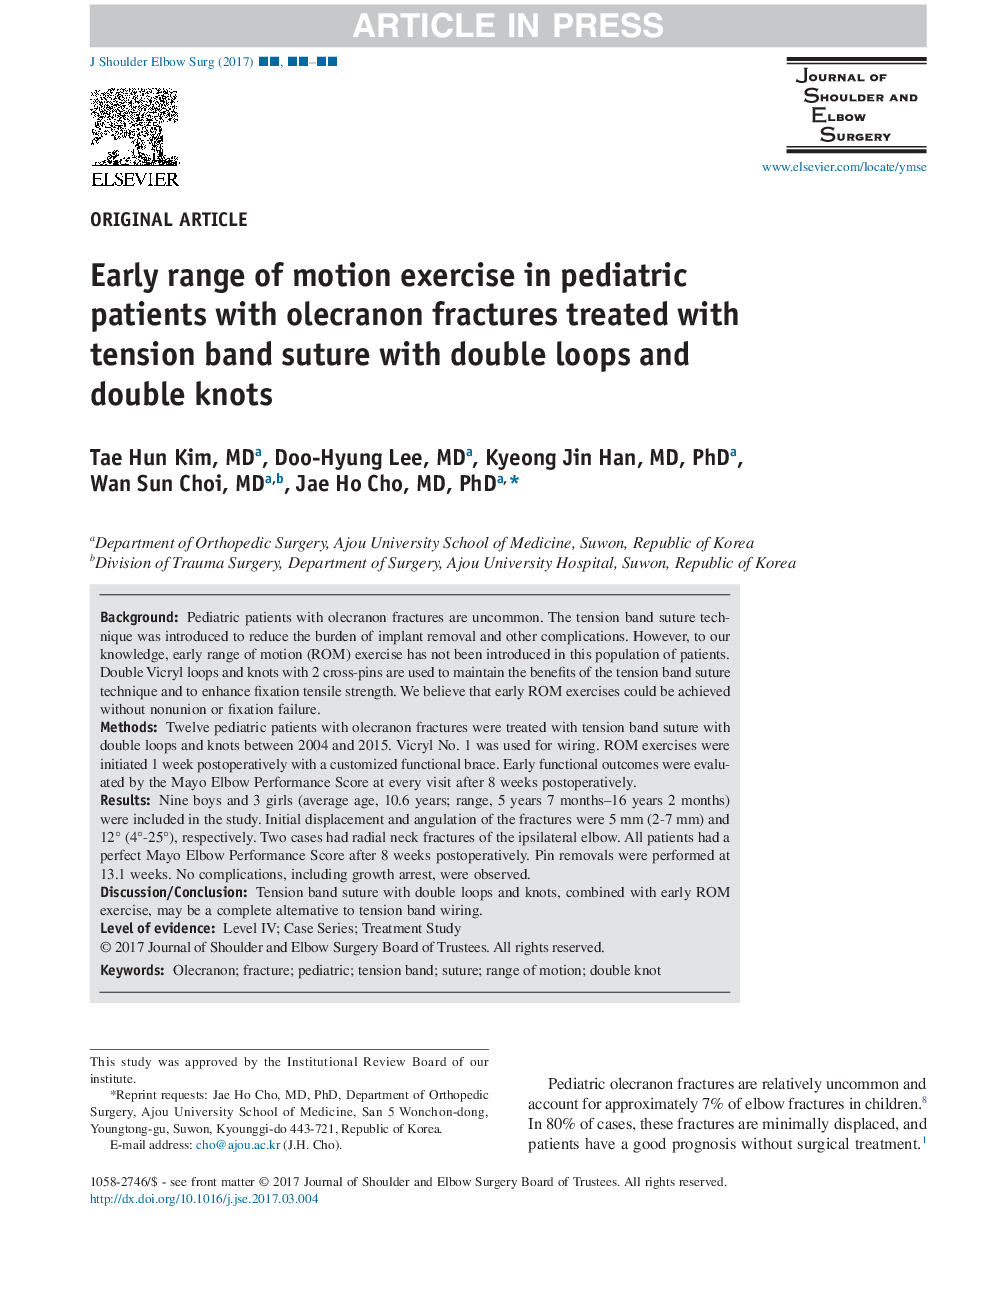 Early range of motion exercise in pediatric patients with olecranon fractures treated with tension band suture with double loops and double knots